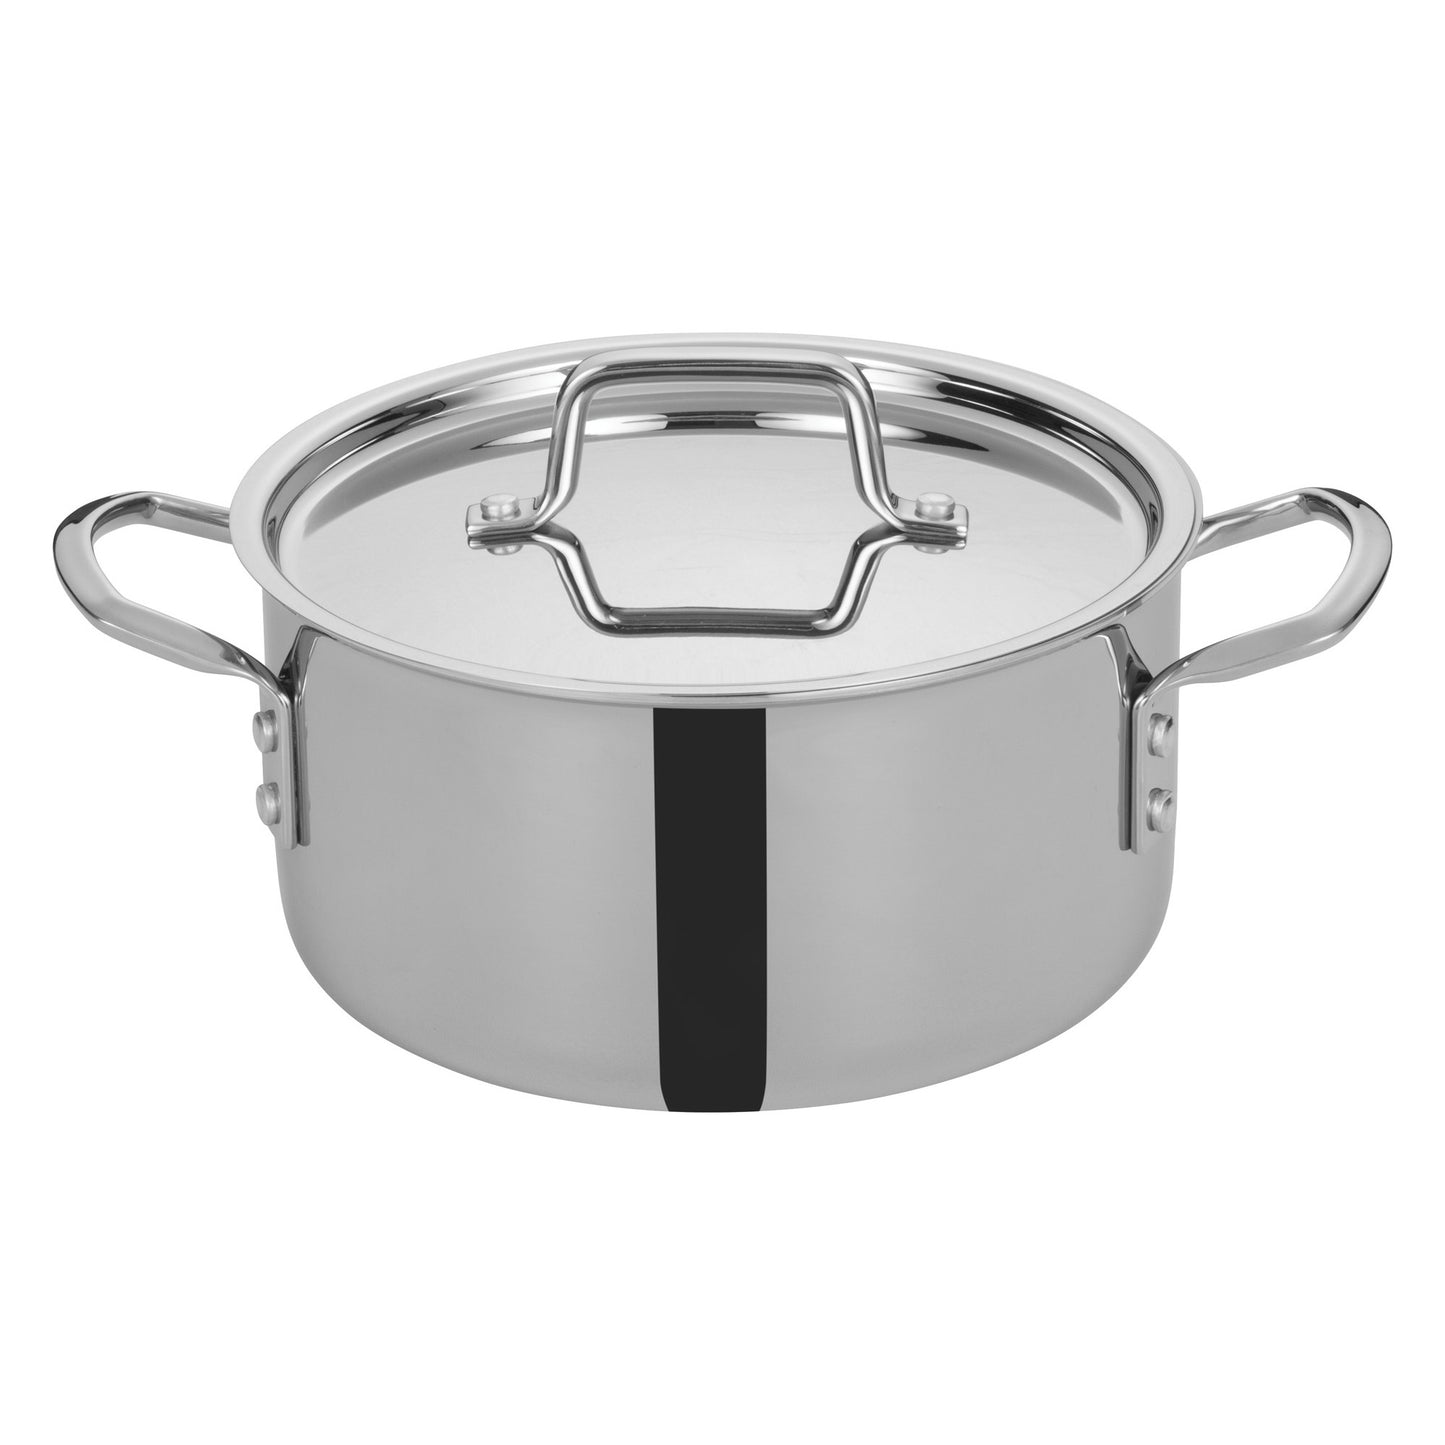 Tri-Gen Tri-Ply Stainless Steel Stock Pot with Cover - 4-1/2 Quart